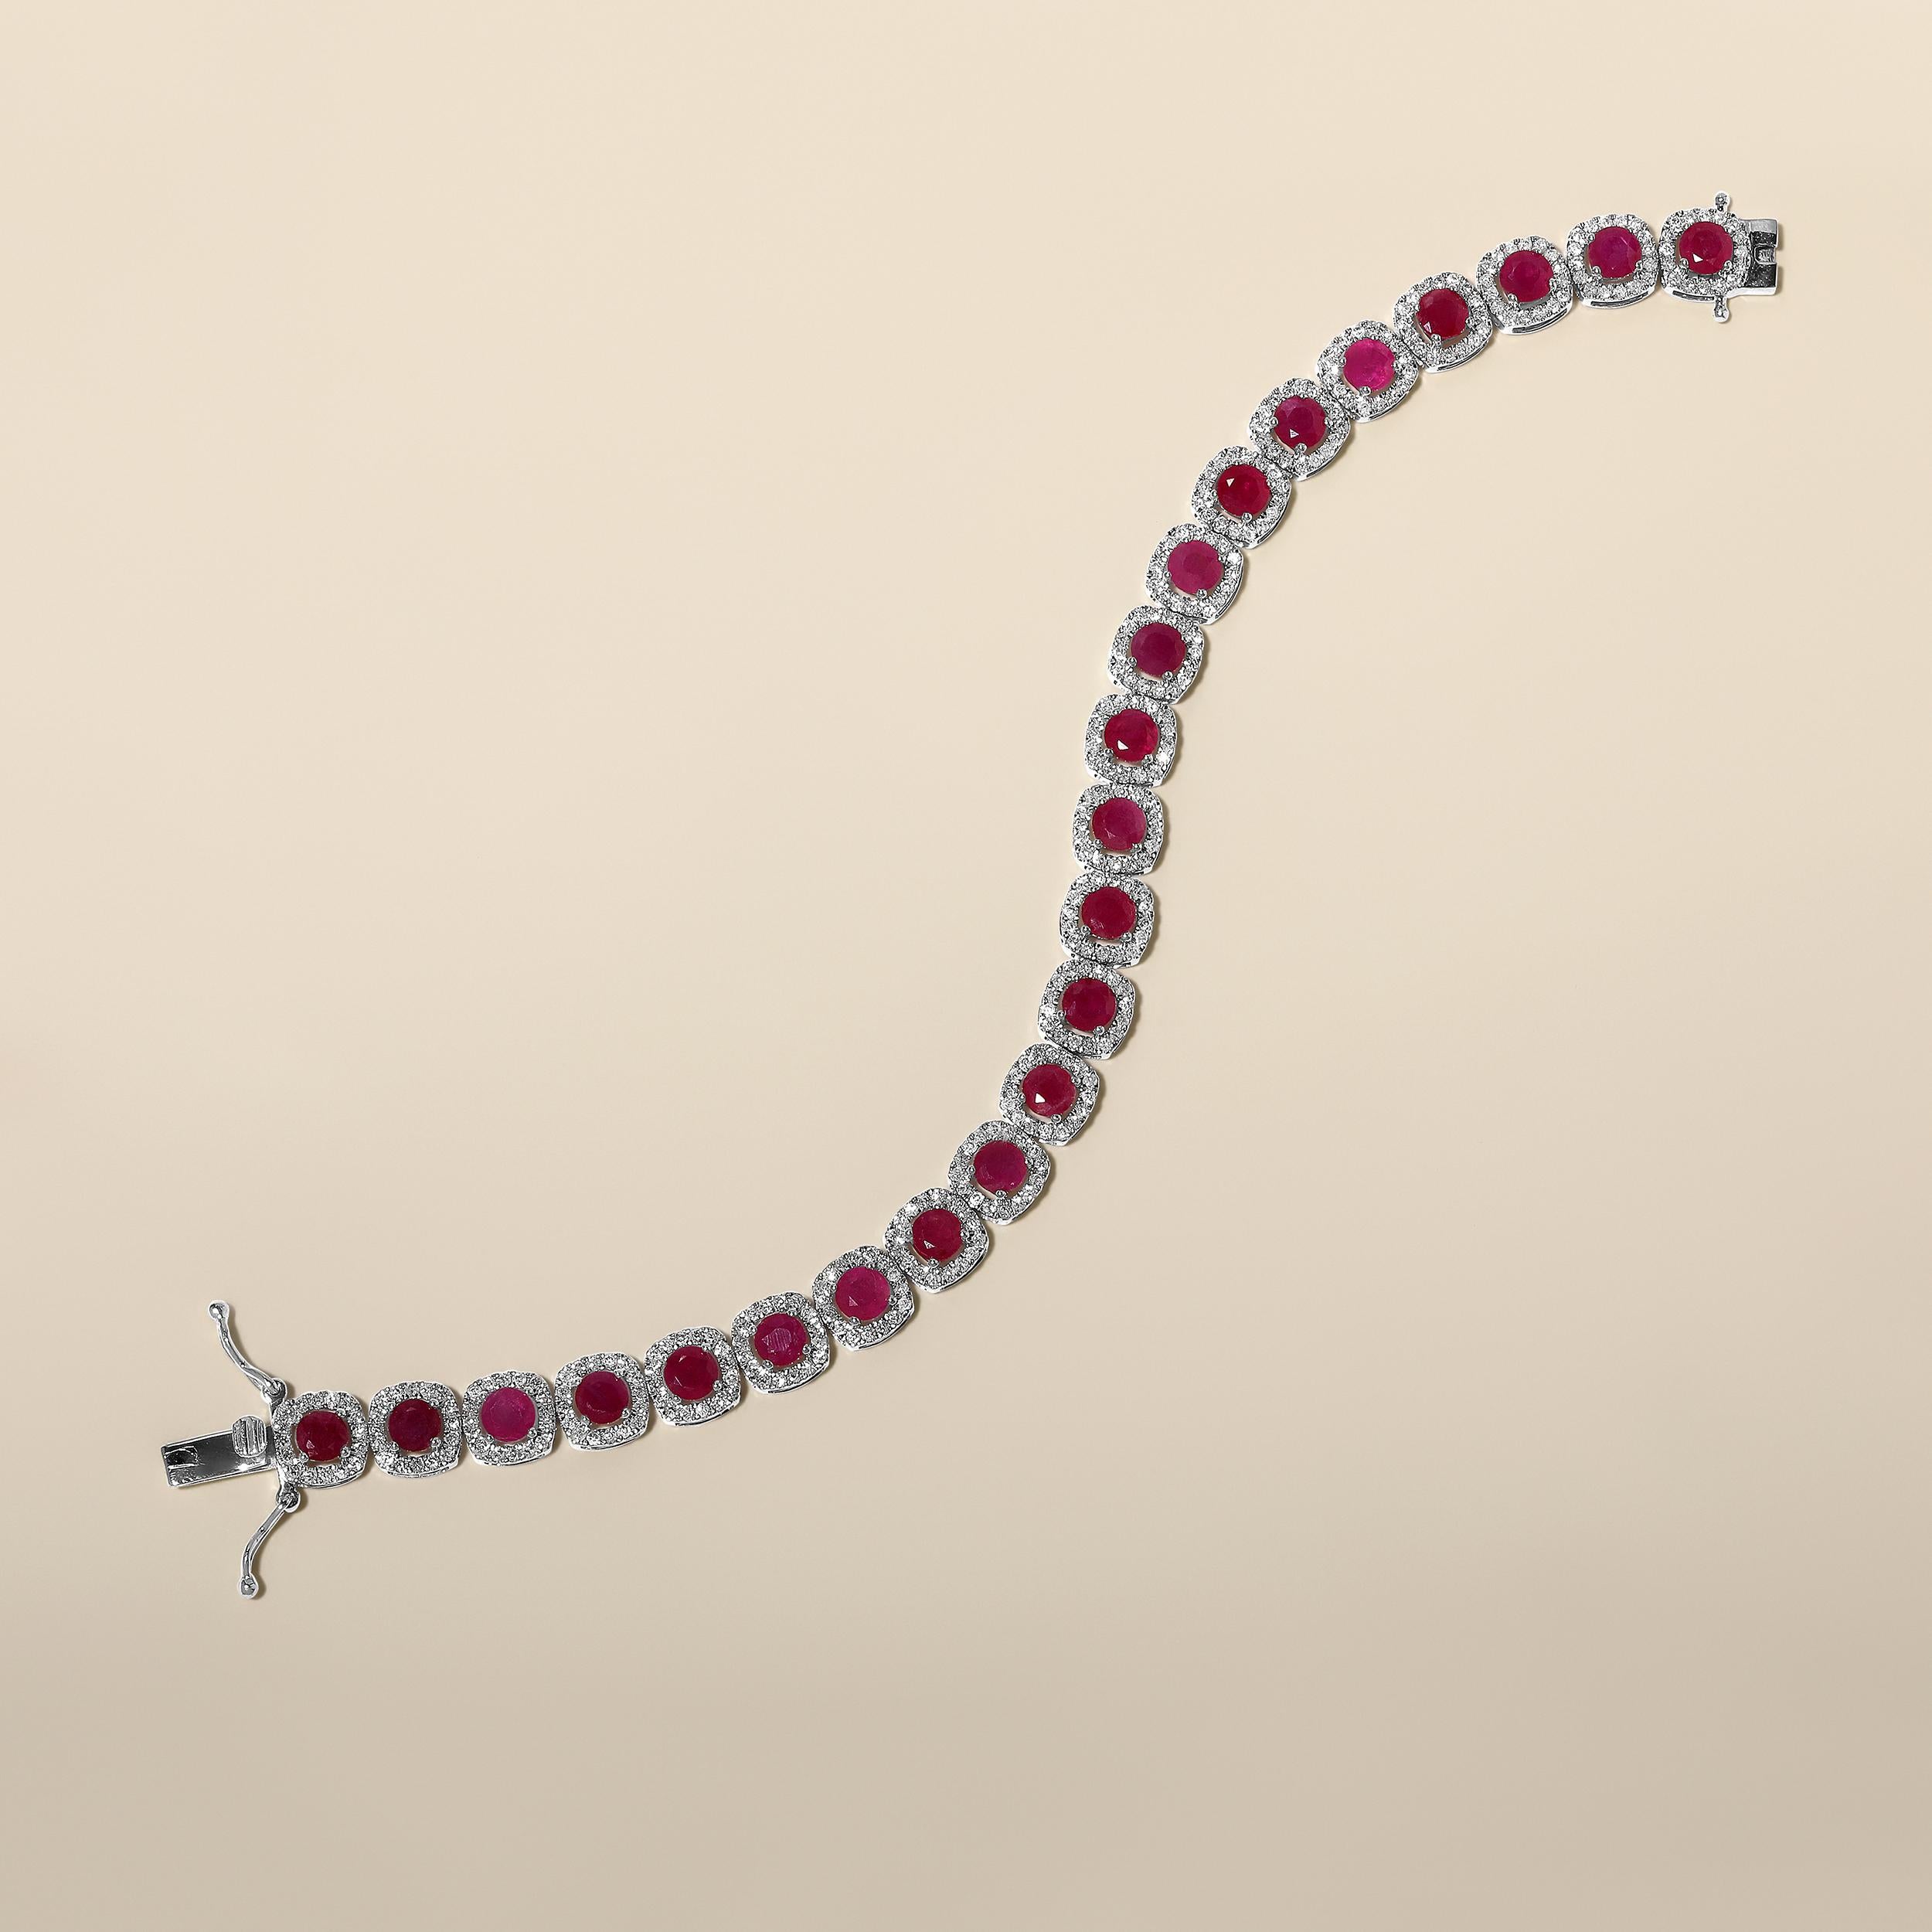 Crafted in 14.35 grams of 14K White Gold, the bracelet contains 368 stones of Round Natural Diamonds with a total of 2.59 carat in G-H color and I1-I2 clarity combined with 23 stones of Round Shaped Natural Ruby Gemstones with a total of 10.52